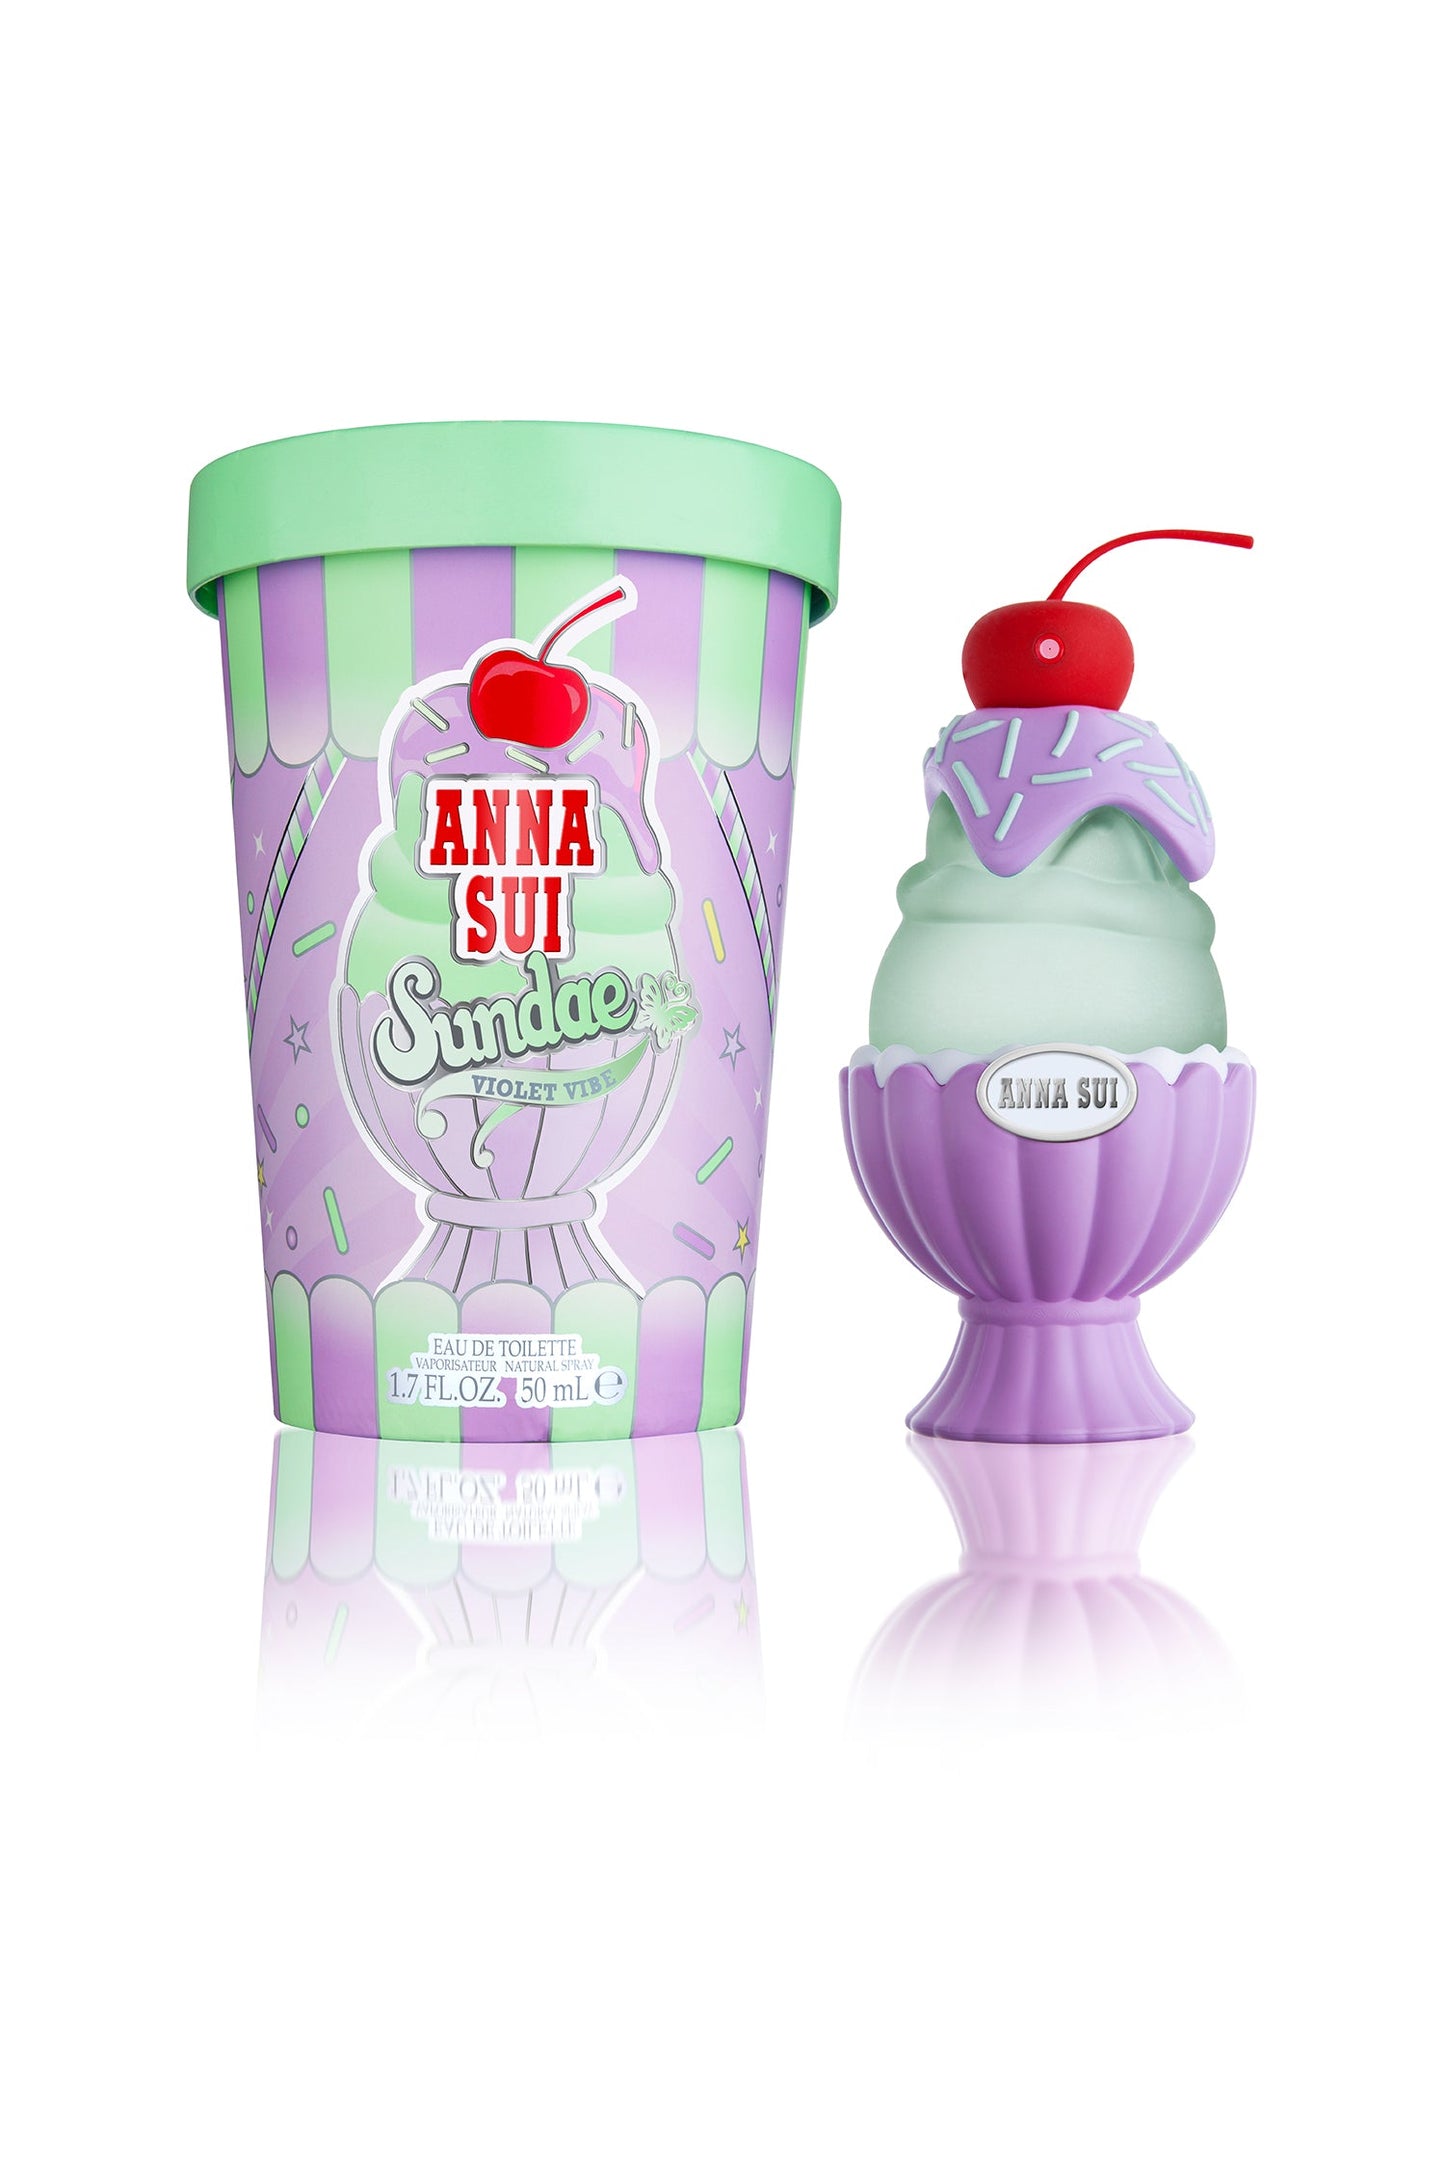 Violet bottle with a shell design and a green ice cream-shaped cap with a cherry, in a popcorn box